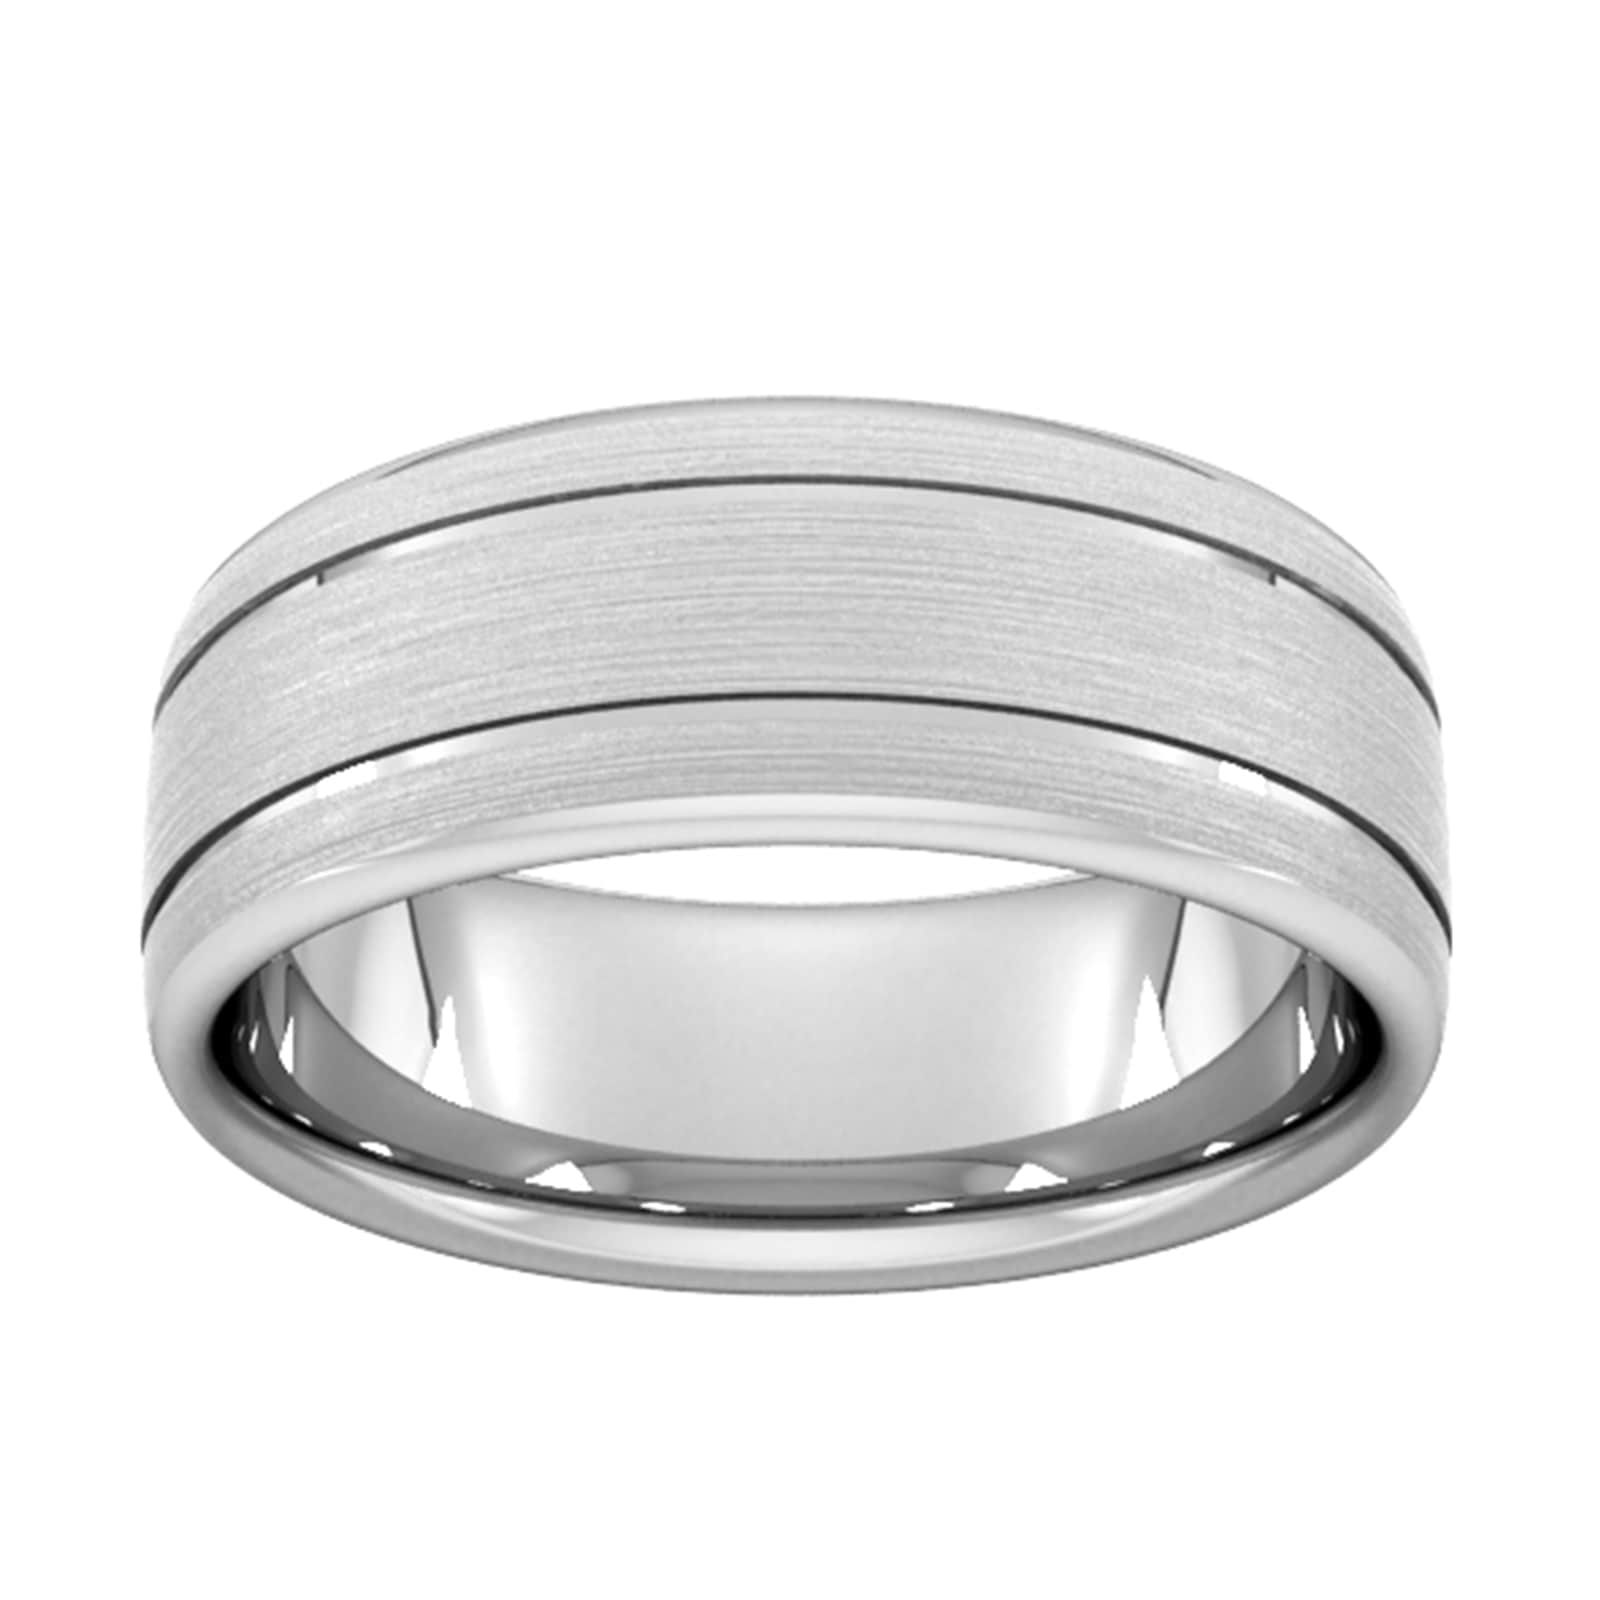 8mm Traditional Court Standard Matt Finish With Double Grooves Wedding Ring In 18 Carat White Gold - Ring Size G